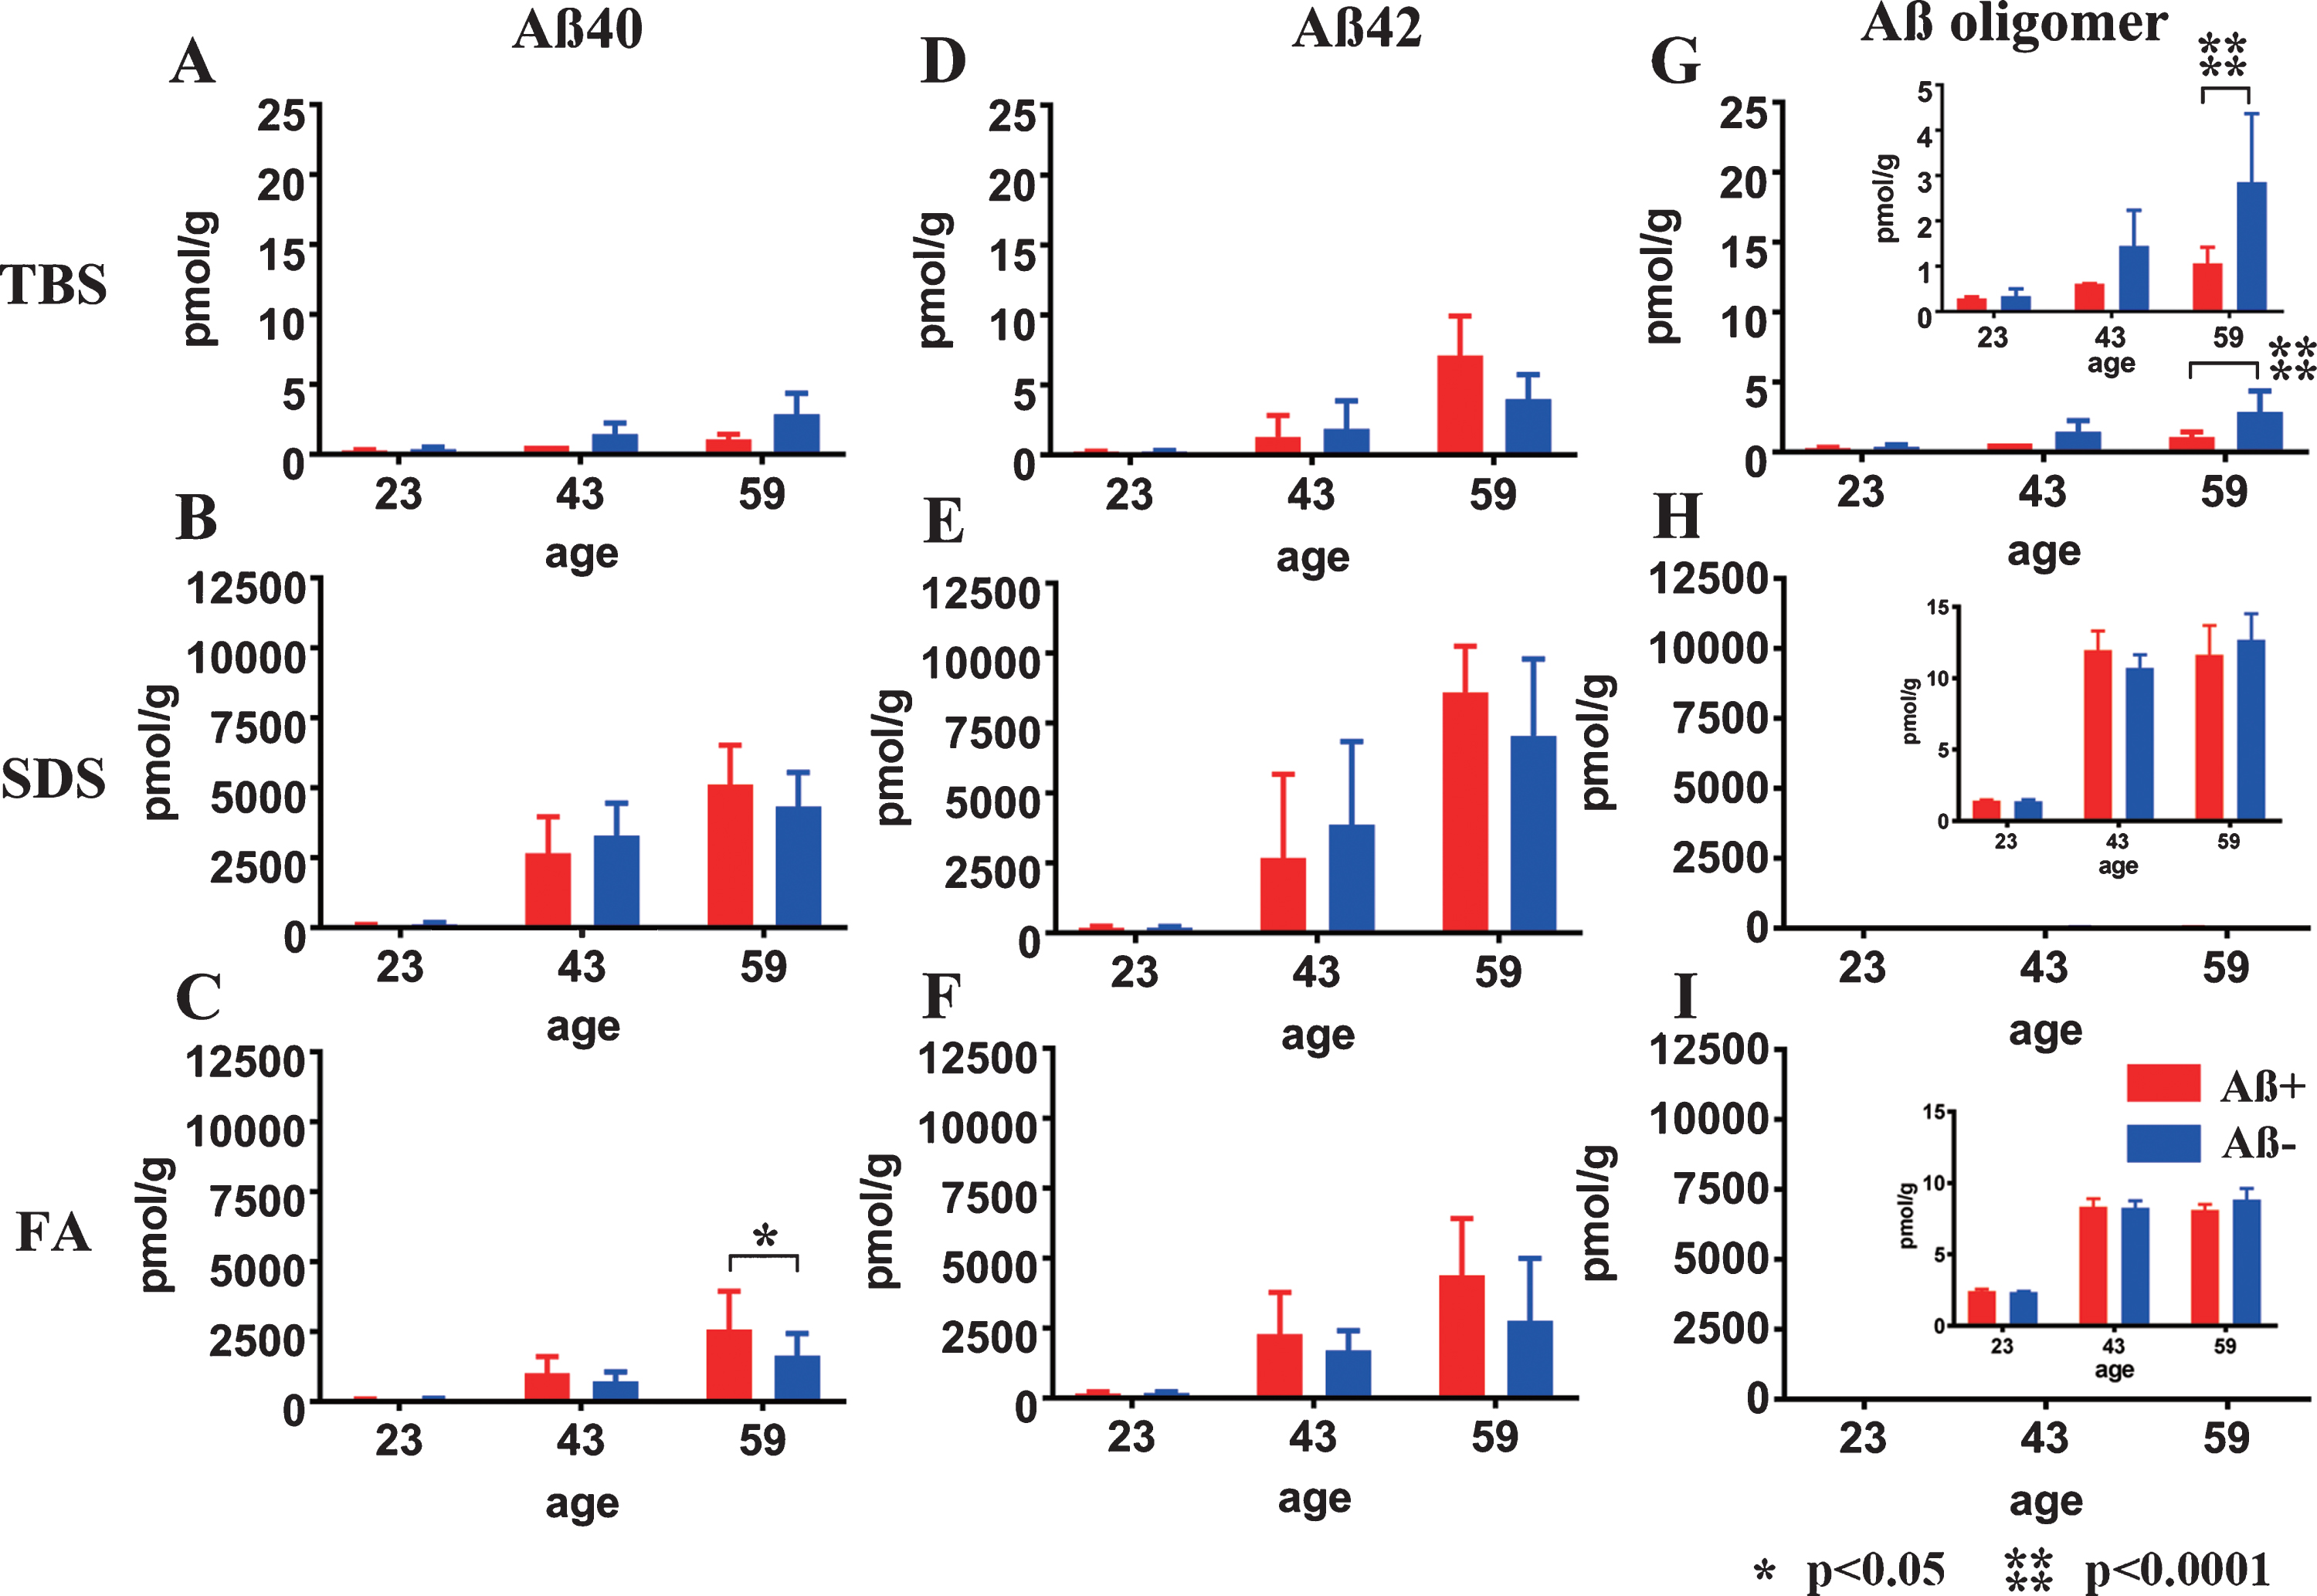 Longitudinal change in Aβ40, Aβ42, and AβOs in TBS, SDS, and FA fractions from Aβ+ or Aβ– treated mouse brains. Amounts of Aβx - 40 (A–C), Aβx - 42 (D–F), and AβOs (G–I) in TBS, SDS, and FA fractions of Aβ+ (red) and Aβ– (blue) immunized mouse brains measured using ELISA at 23, 43, and 59 weeks old. There were no significant differences in the levels of Aβx - 40 (A, B) and Aβx - 42 (D–F) between Aβ+ and Aβ– treated groups at any time points or in any fractions, except for the Aβx - 40 in the FA fraction at 59 weeks old (C: *p<0.05). Significant suppression of AβOs in TBS soluble fractions was revealed in Aβ+ treated mice compared with Aβ– treated mice (G and enlarged illustration, ****p < 0.0001). Amounts of AβOs in SDS and FA fractions were very low compared with Aβ40 and Aβ42 in the same fraction (H, I). Mice at 23 weeks (n = 9 for Aβ+, n = 11 for Aβ–), 43 weeks (n = 7 for Aβ+, n = 6 for Aβ–), and 59 weeks (n = 6 for Aβ+, n = 7 for Aβ–) were measured by ELISA.